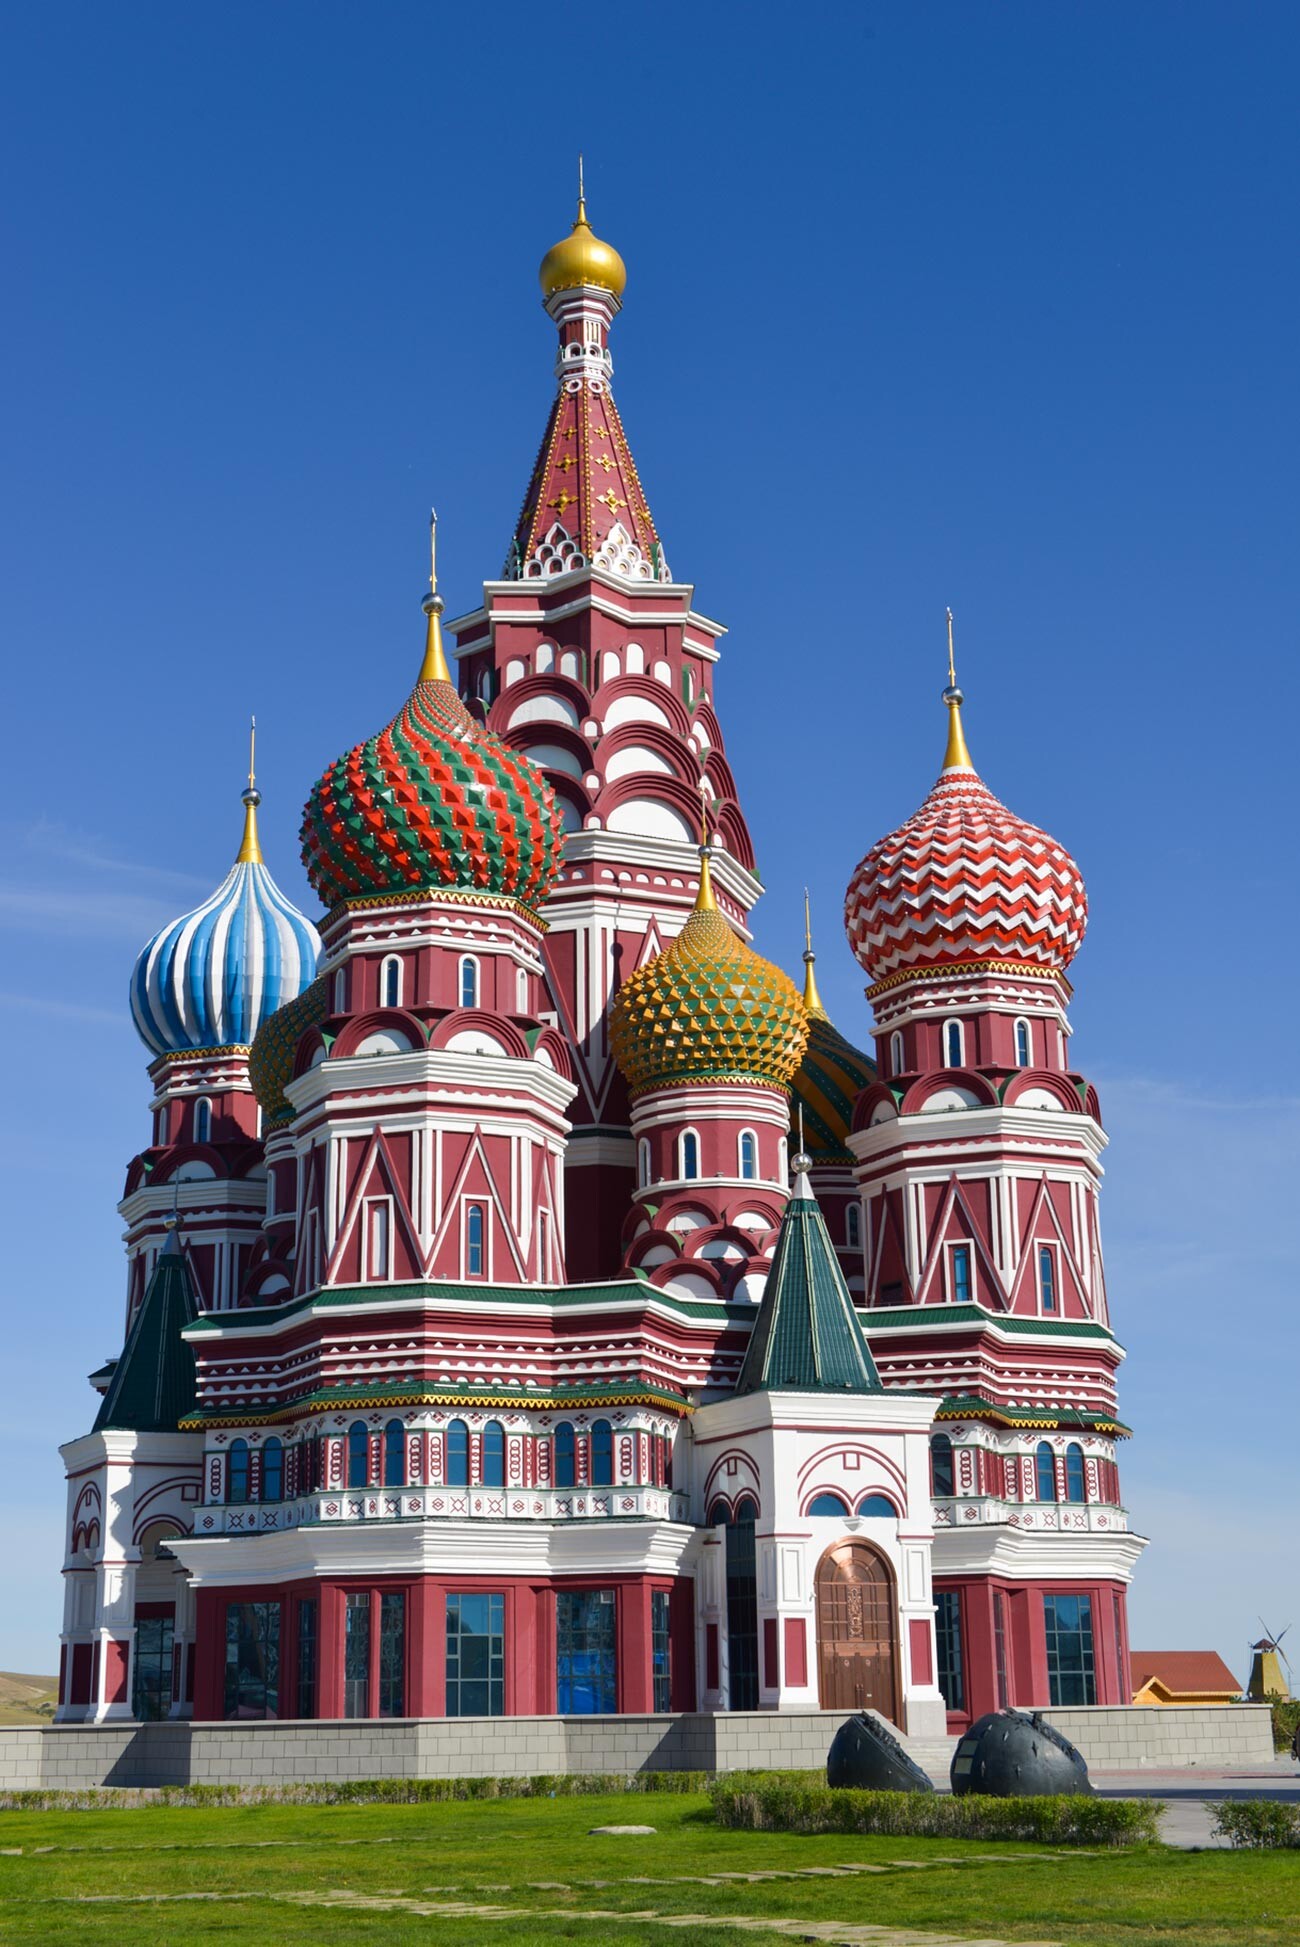 A replica of Moscow's St. Basil's Cathedral used as a science museum in Jalainur, China